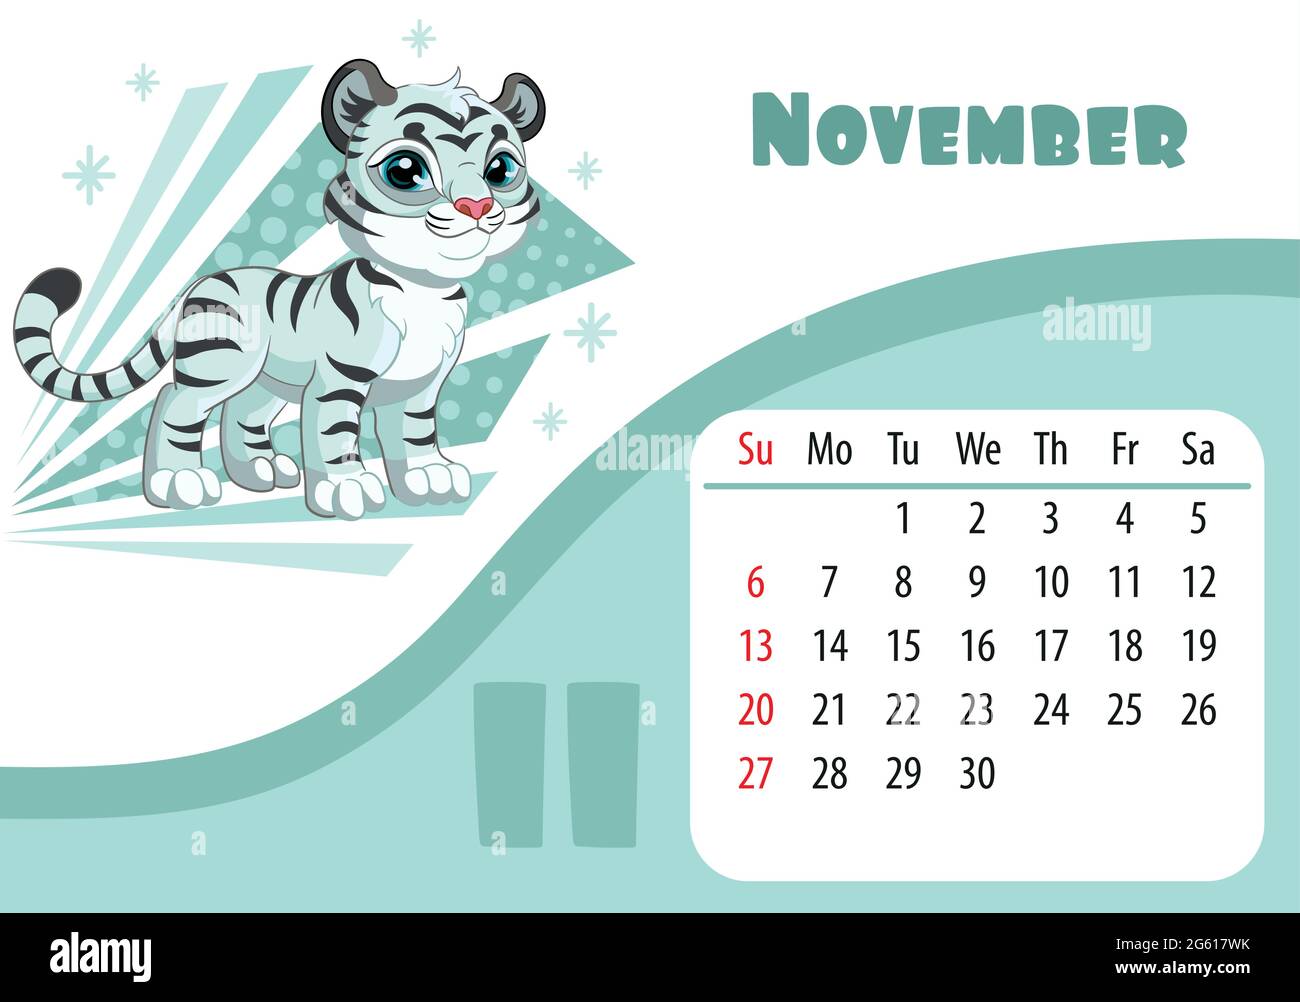 Horizontal desktop childrens calendar design for november 2022, the year of the Tiger in the Chinese calendar. Cute standing tiger character with snow Stock Vector